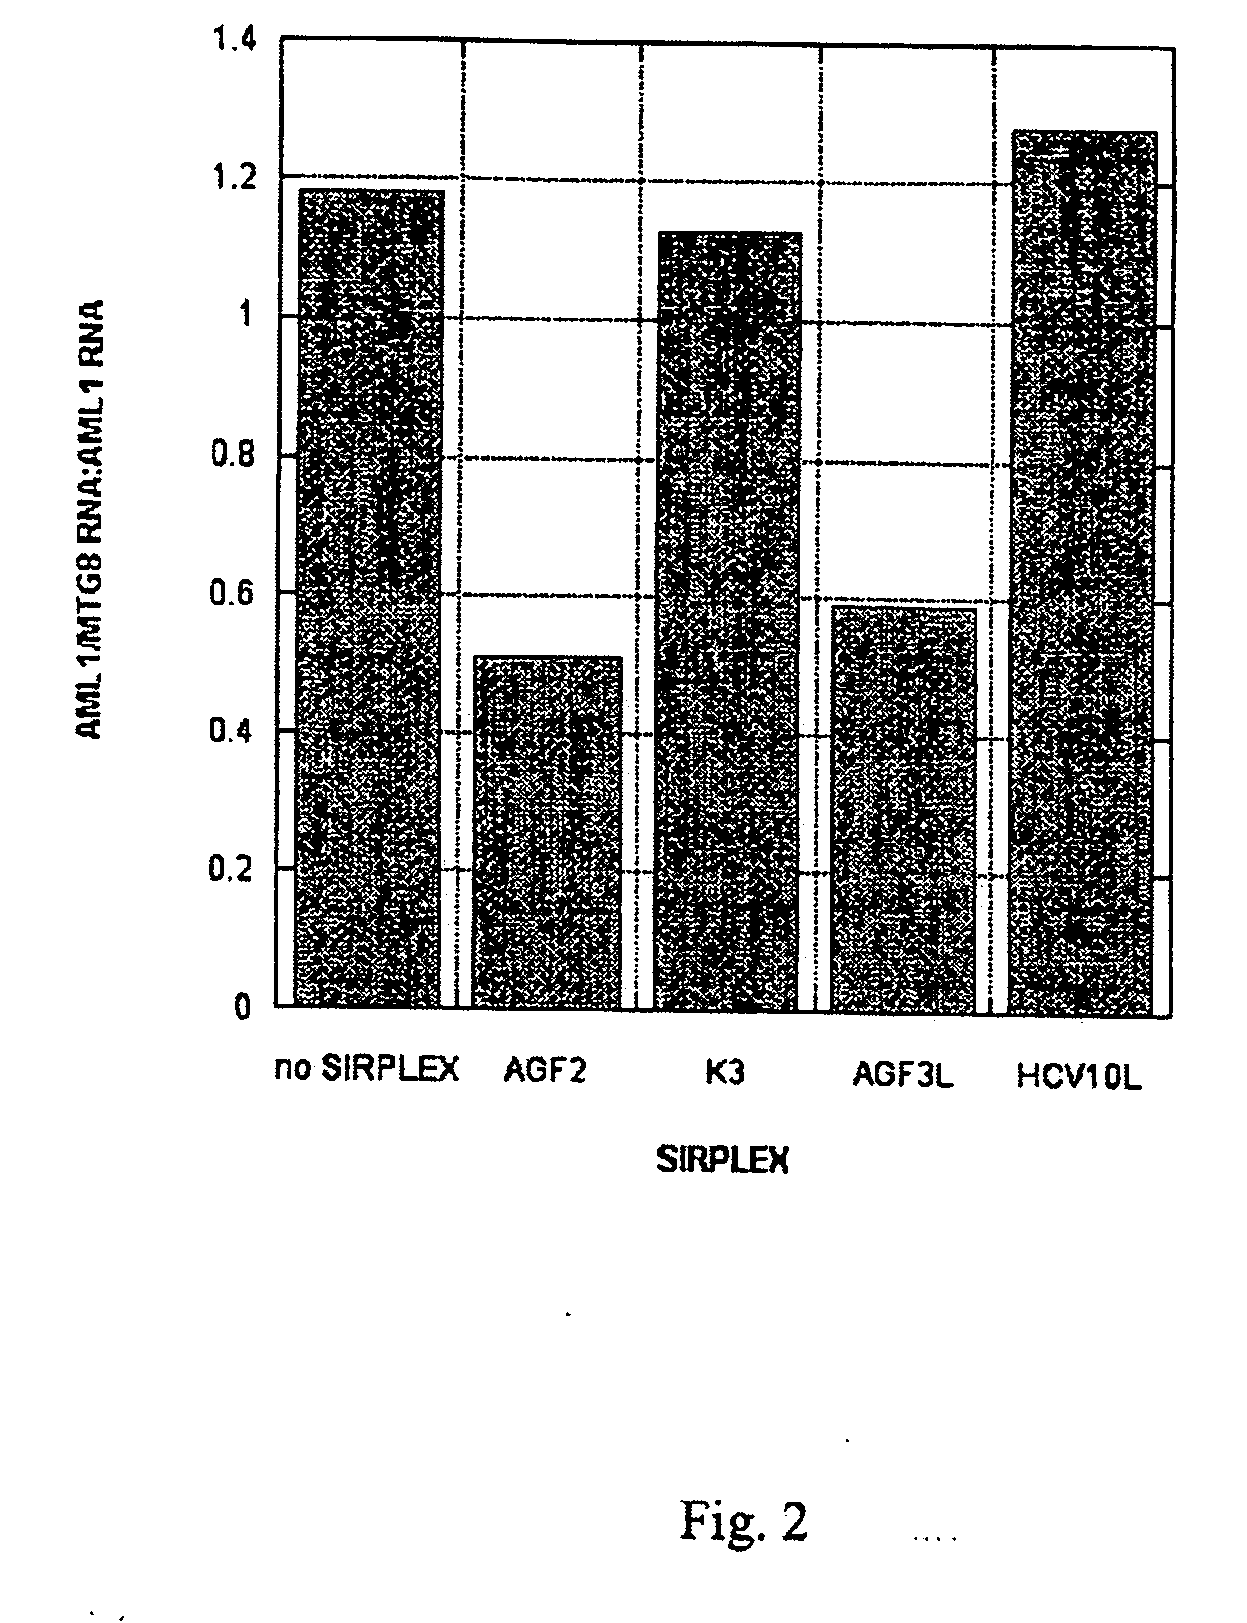 Double-stranded RNA (dsRNA) and method of use for inhibiting expression of a fusion gene